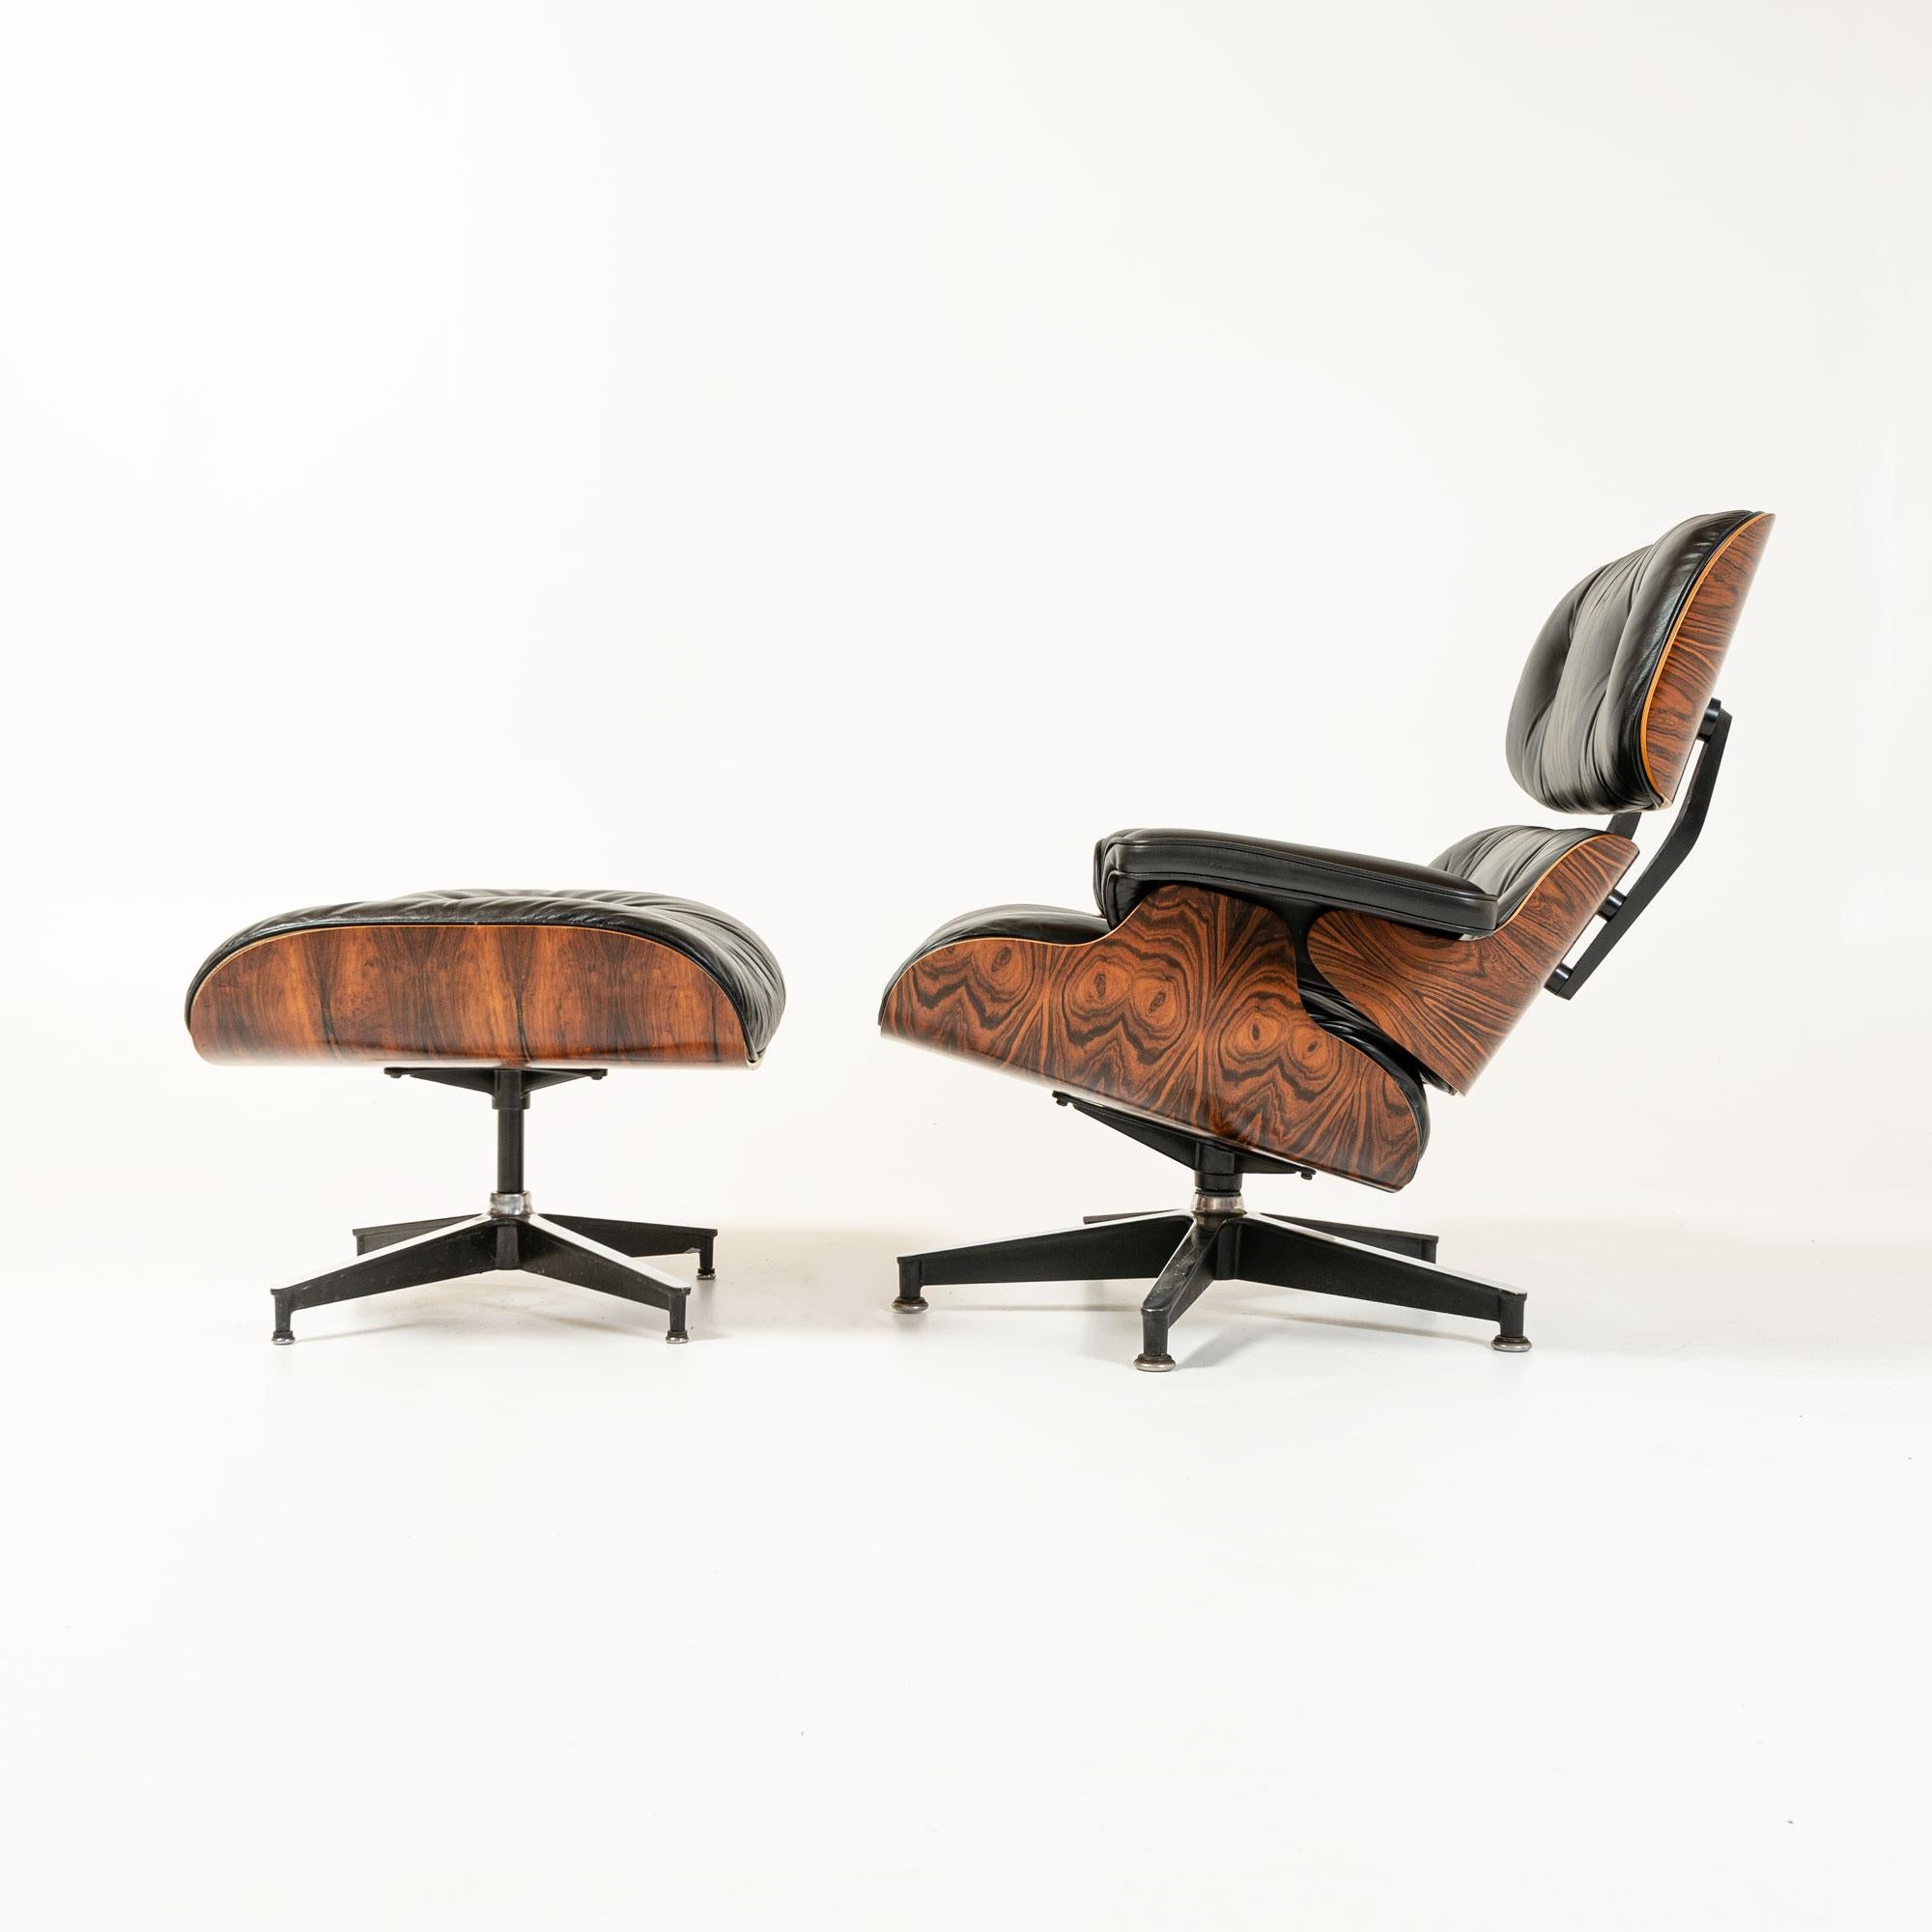 3rd Gen Eames lounge chair with ottoman with exceptional grain in original finish rosewood shell and restored black leather cushions.

Production dated 26th of June 1984, this is one of the most visually striking grain pattern Eames Lounge Chair we